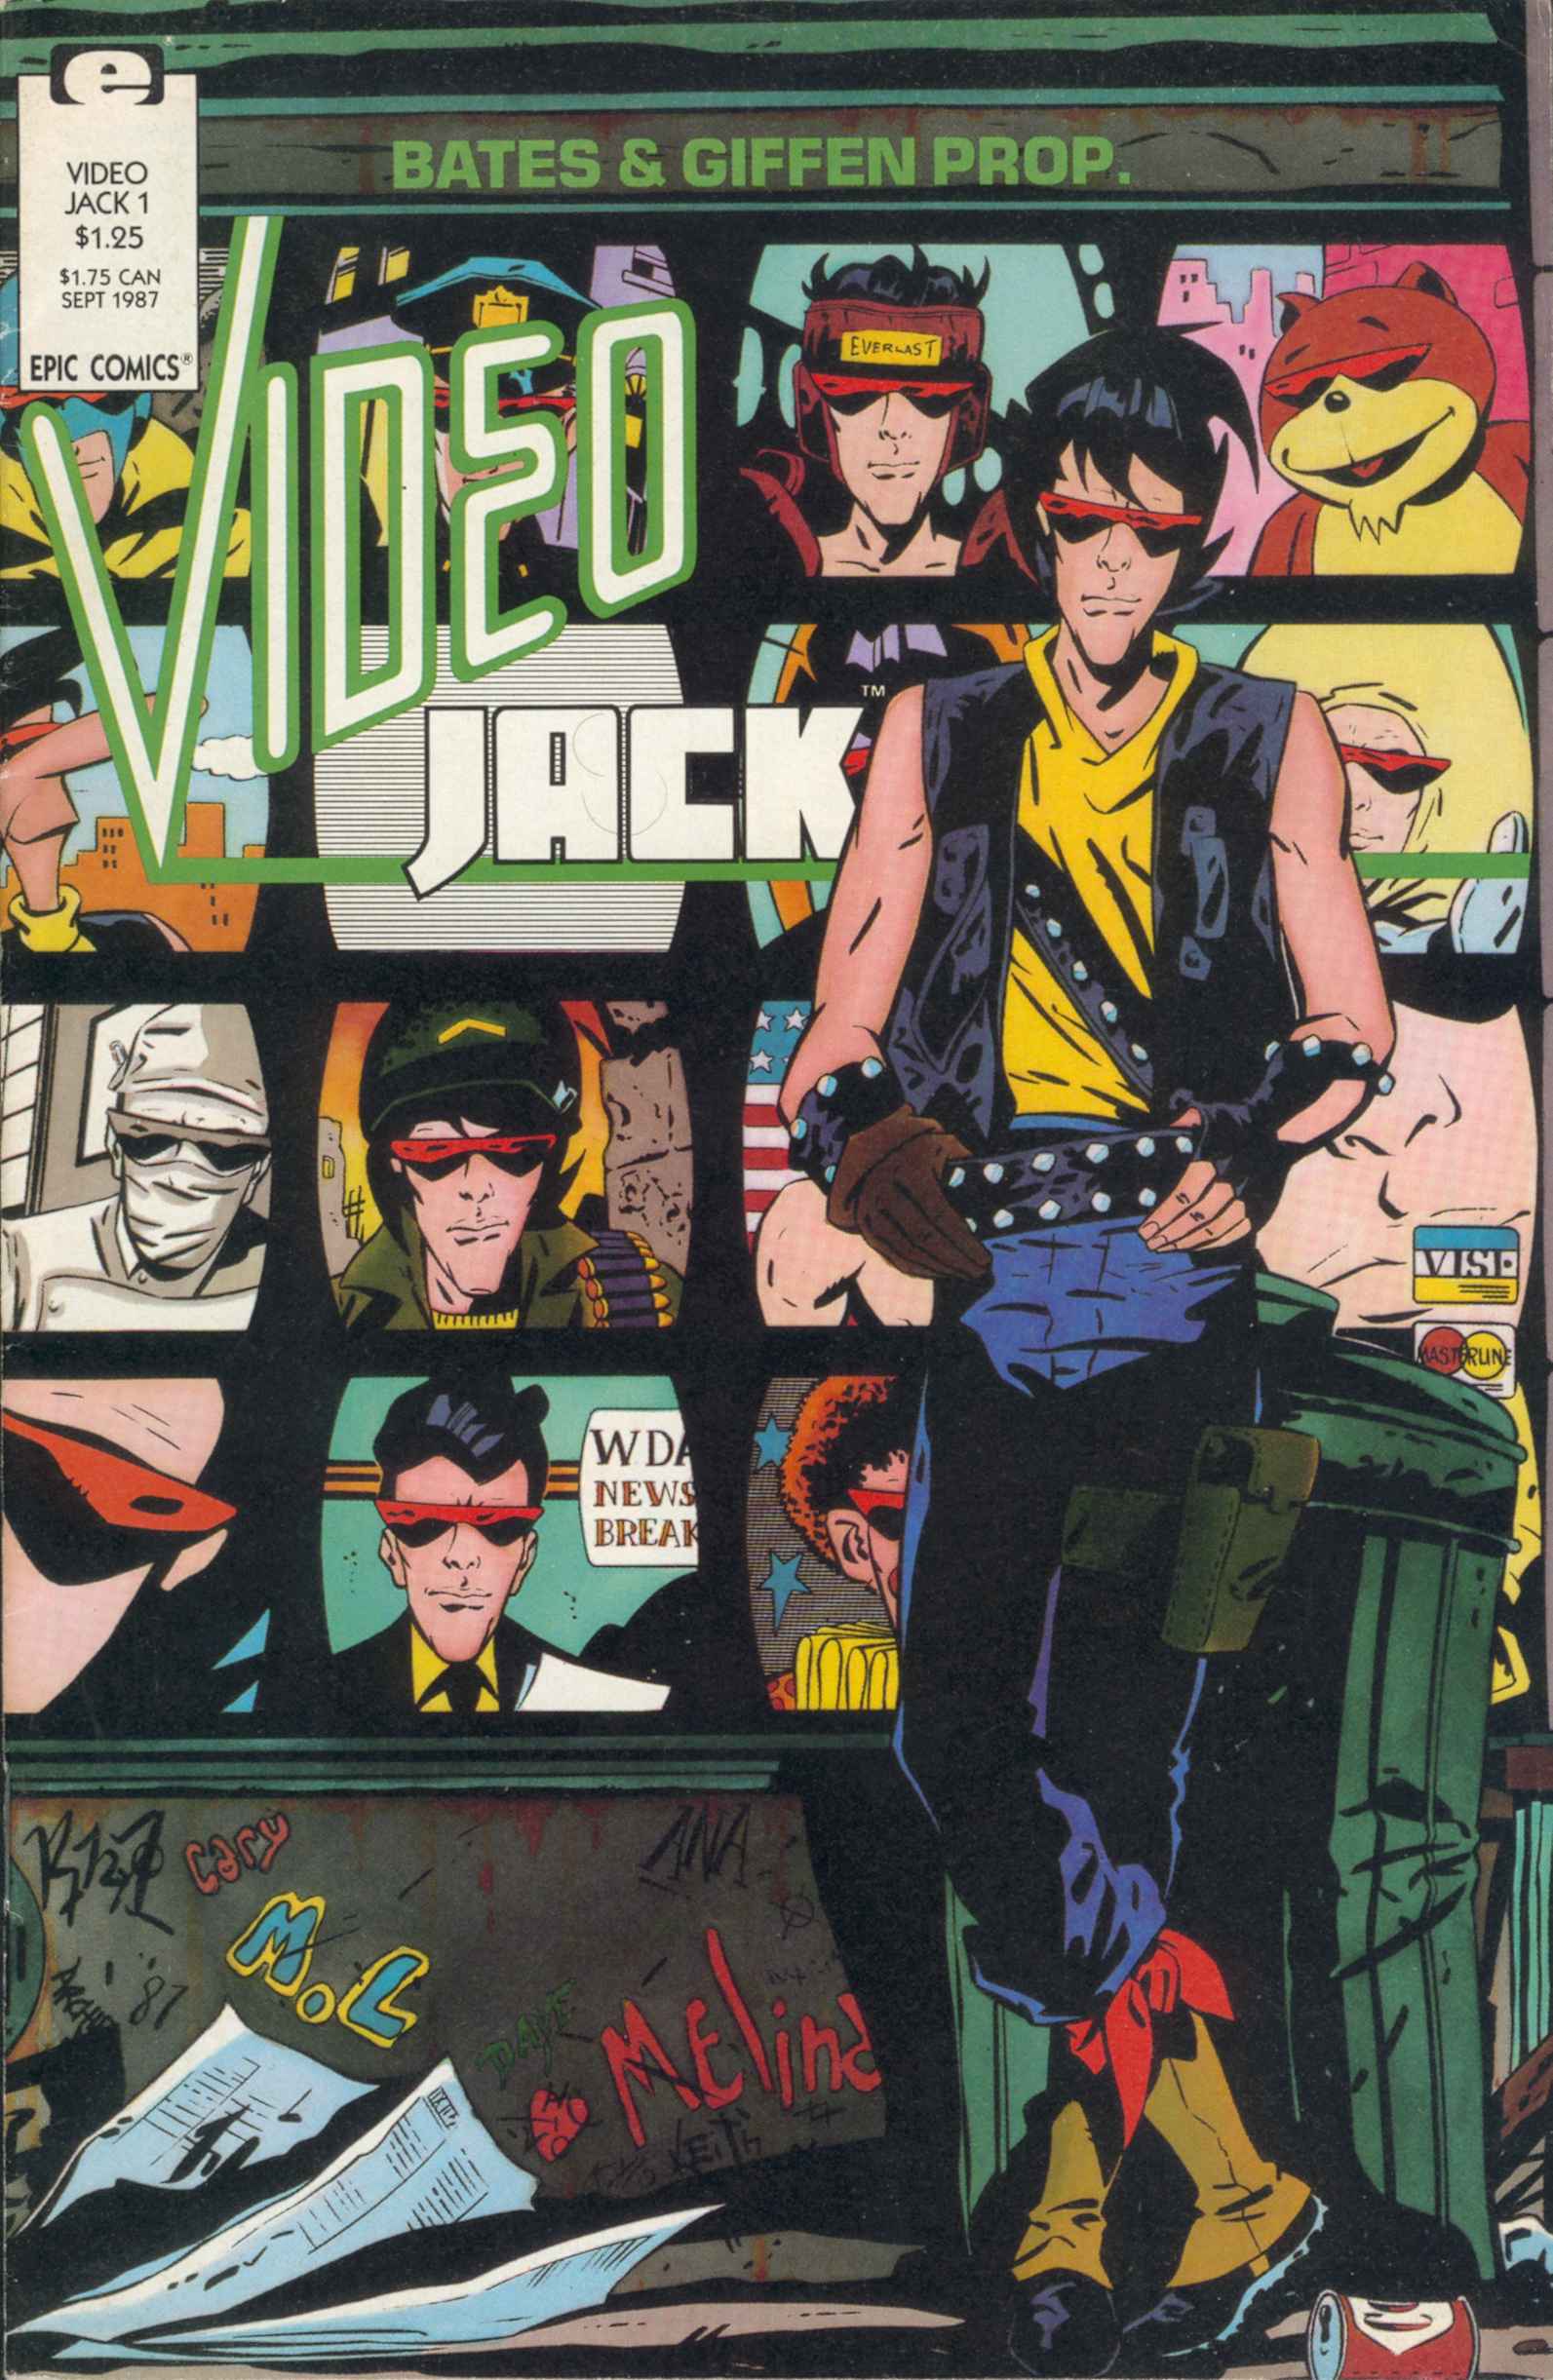 Read online Video Jack comic -  Issue #1 - 1